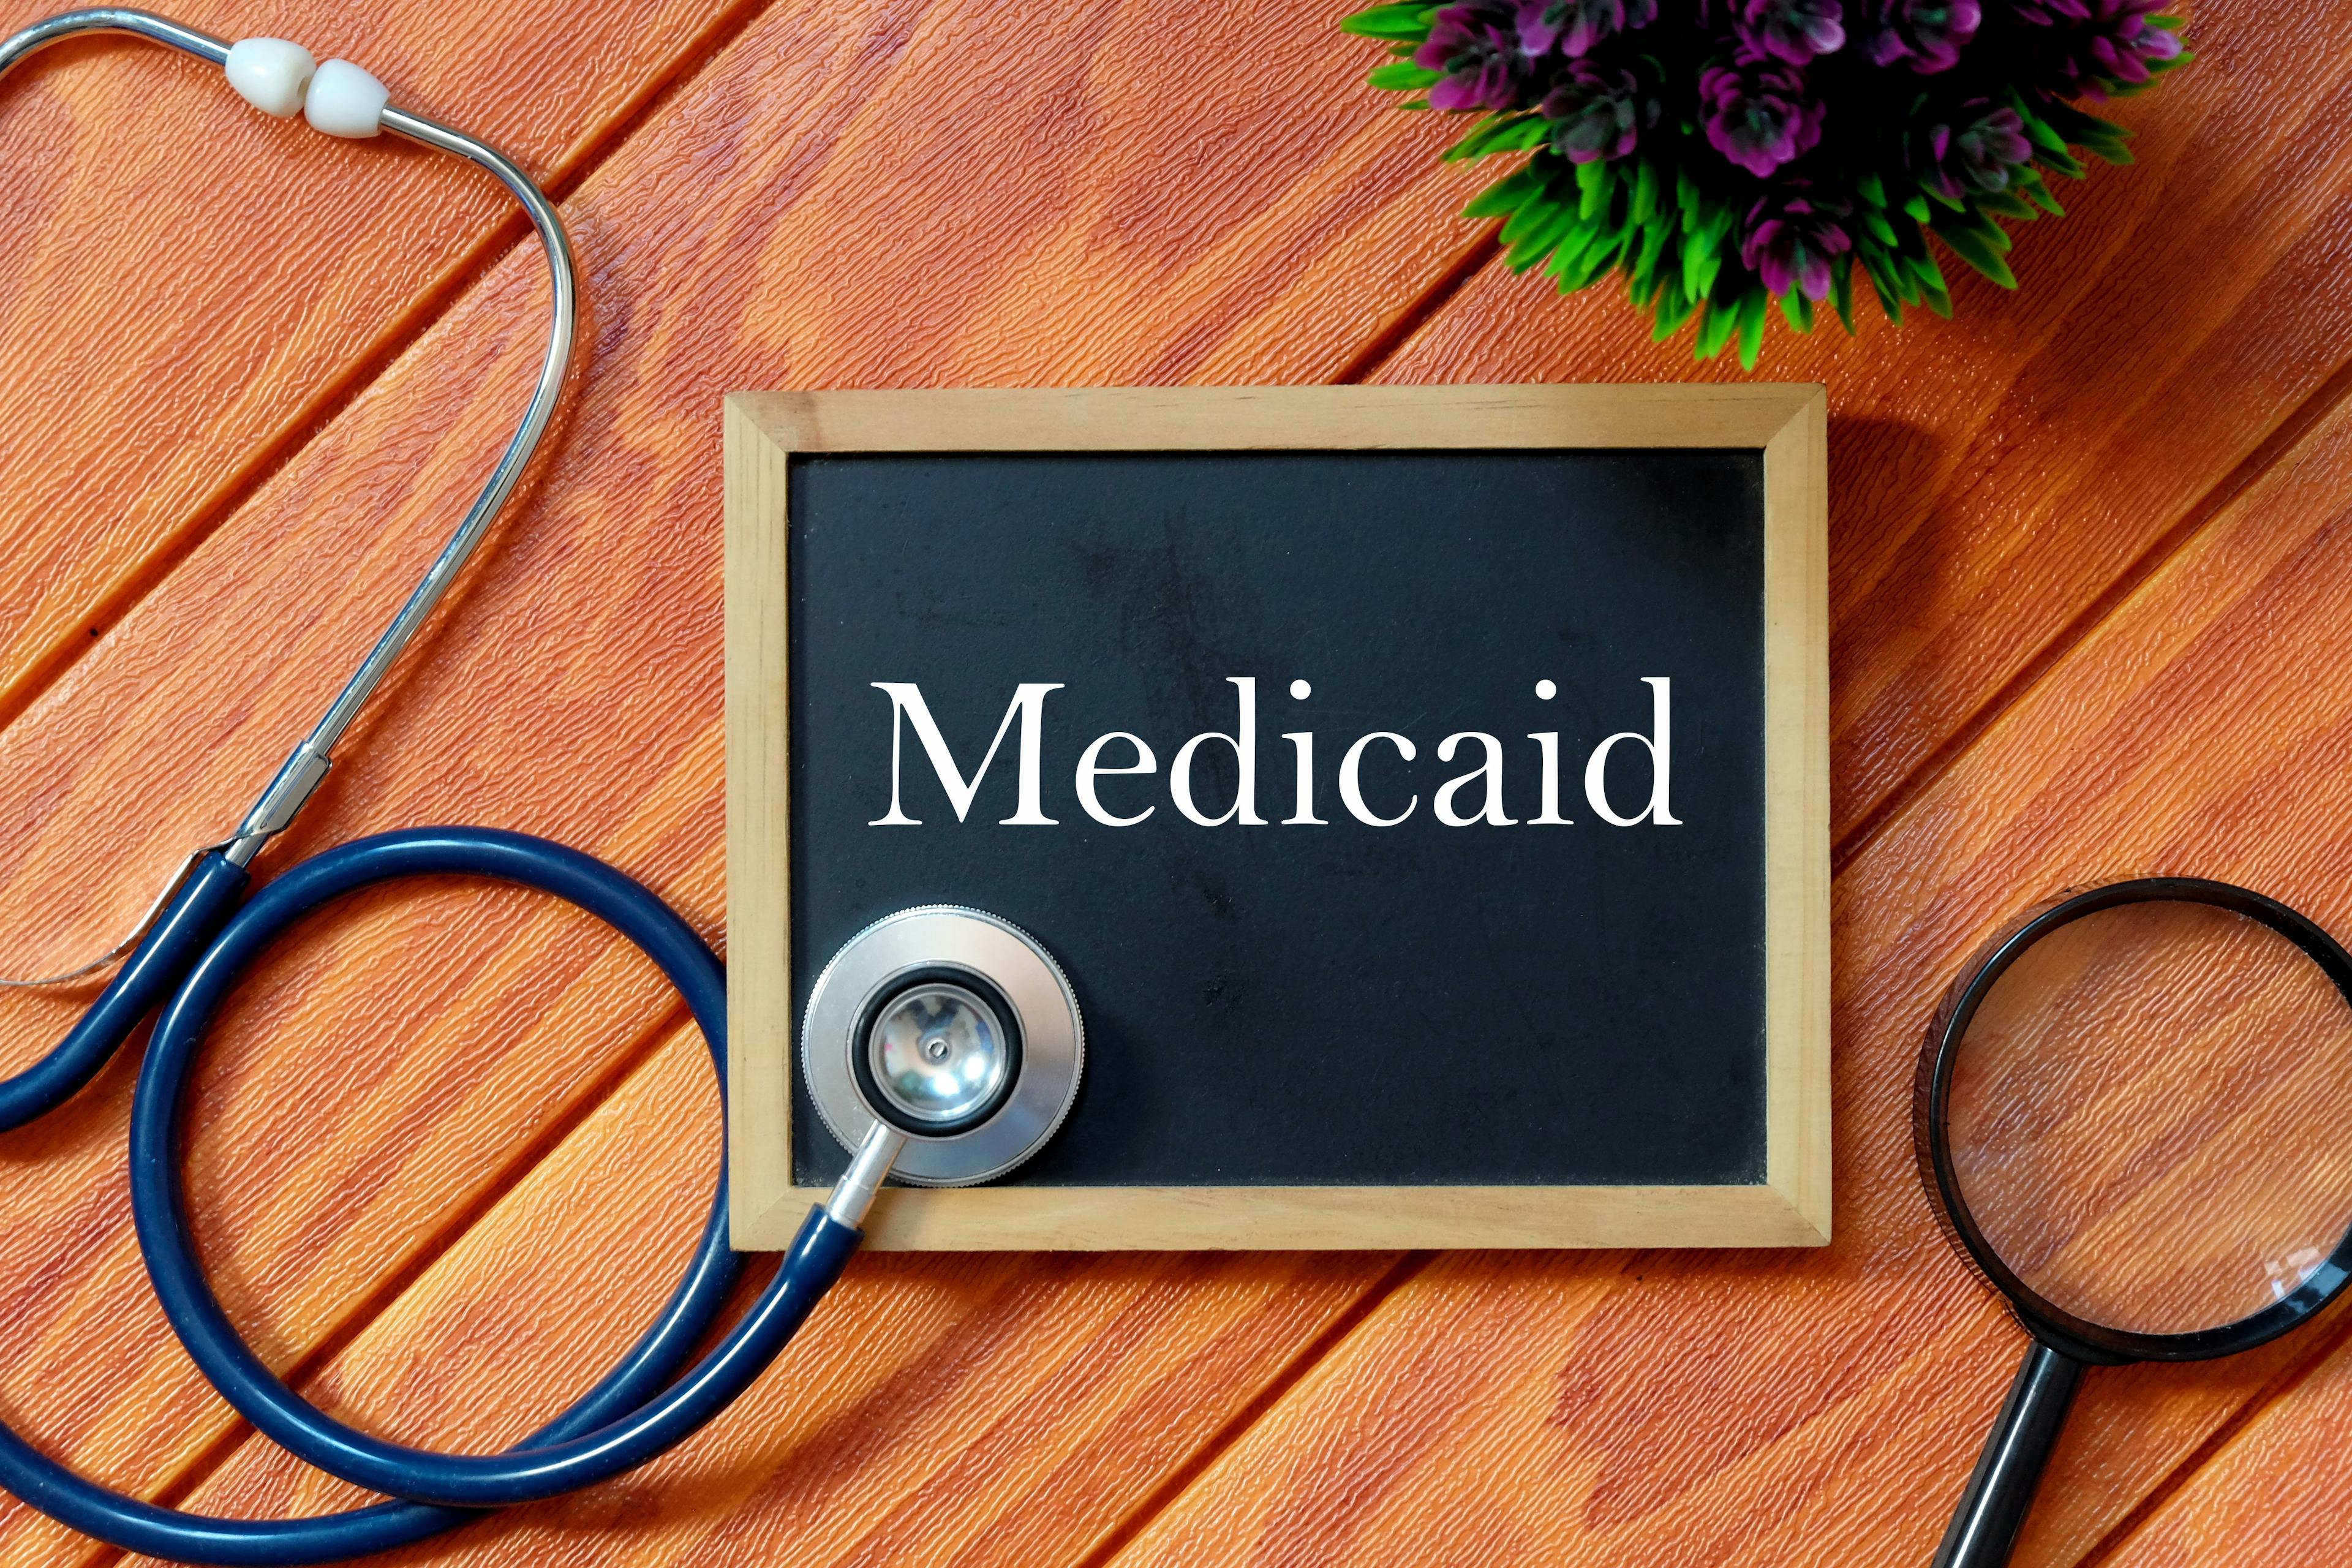 More than 1 million have lost Medicaid coverage, and hospitals are seeing the effects